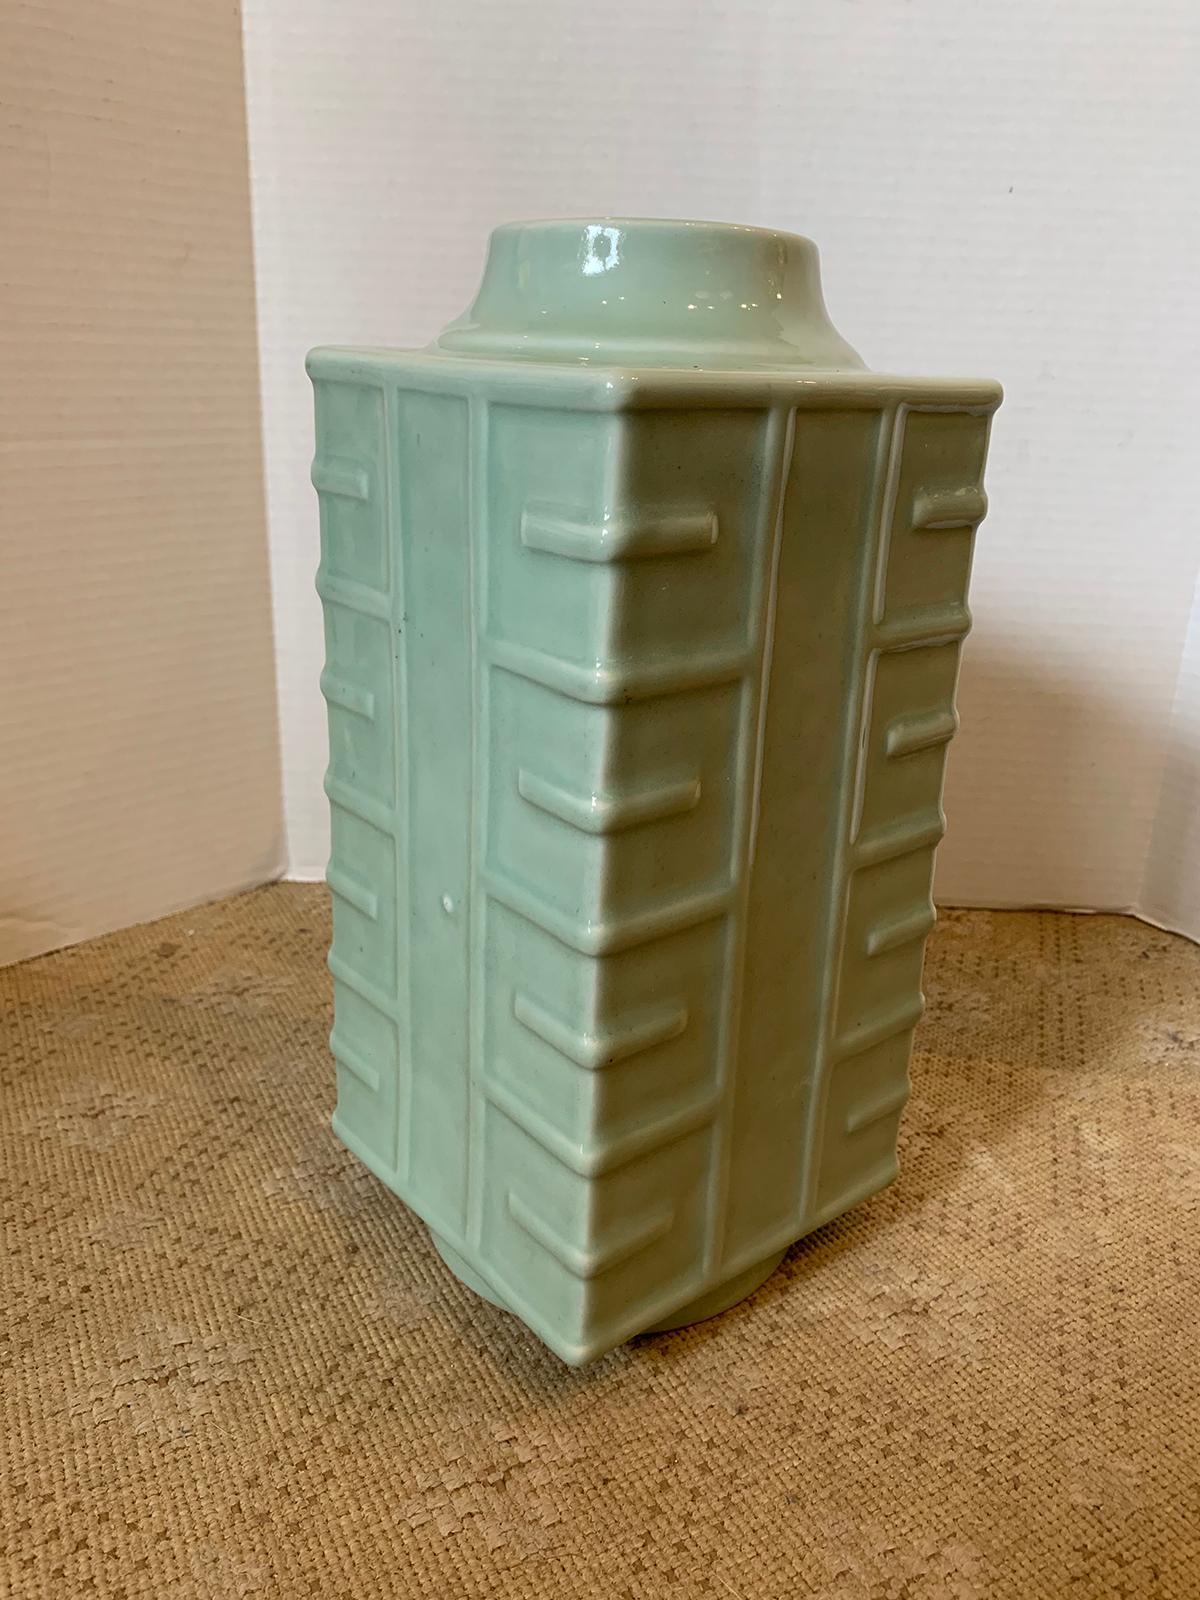 Ceramic Late 19th-Early 20th Century Glazed Celadon Porcelain Square Cong Form Vase